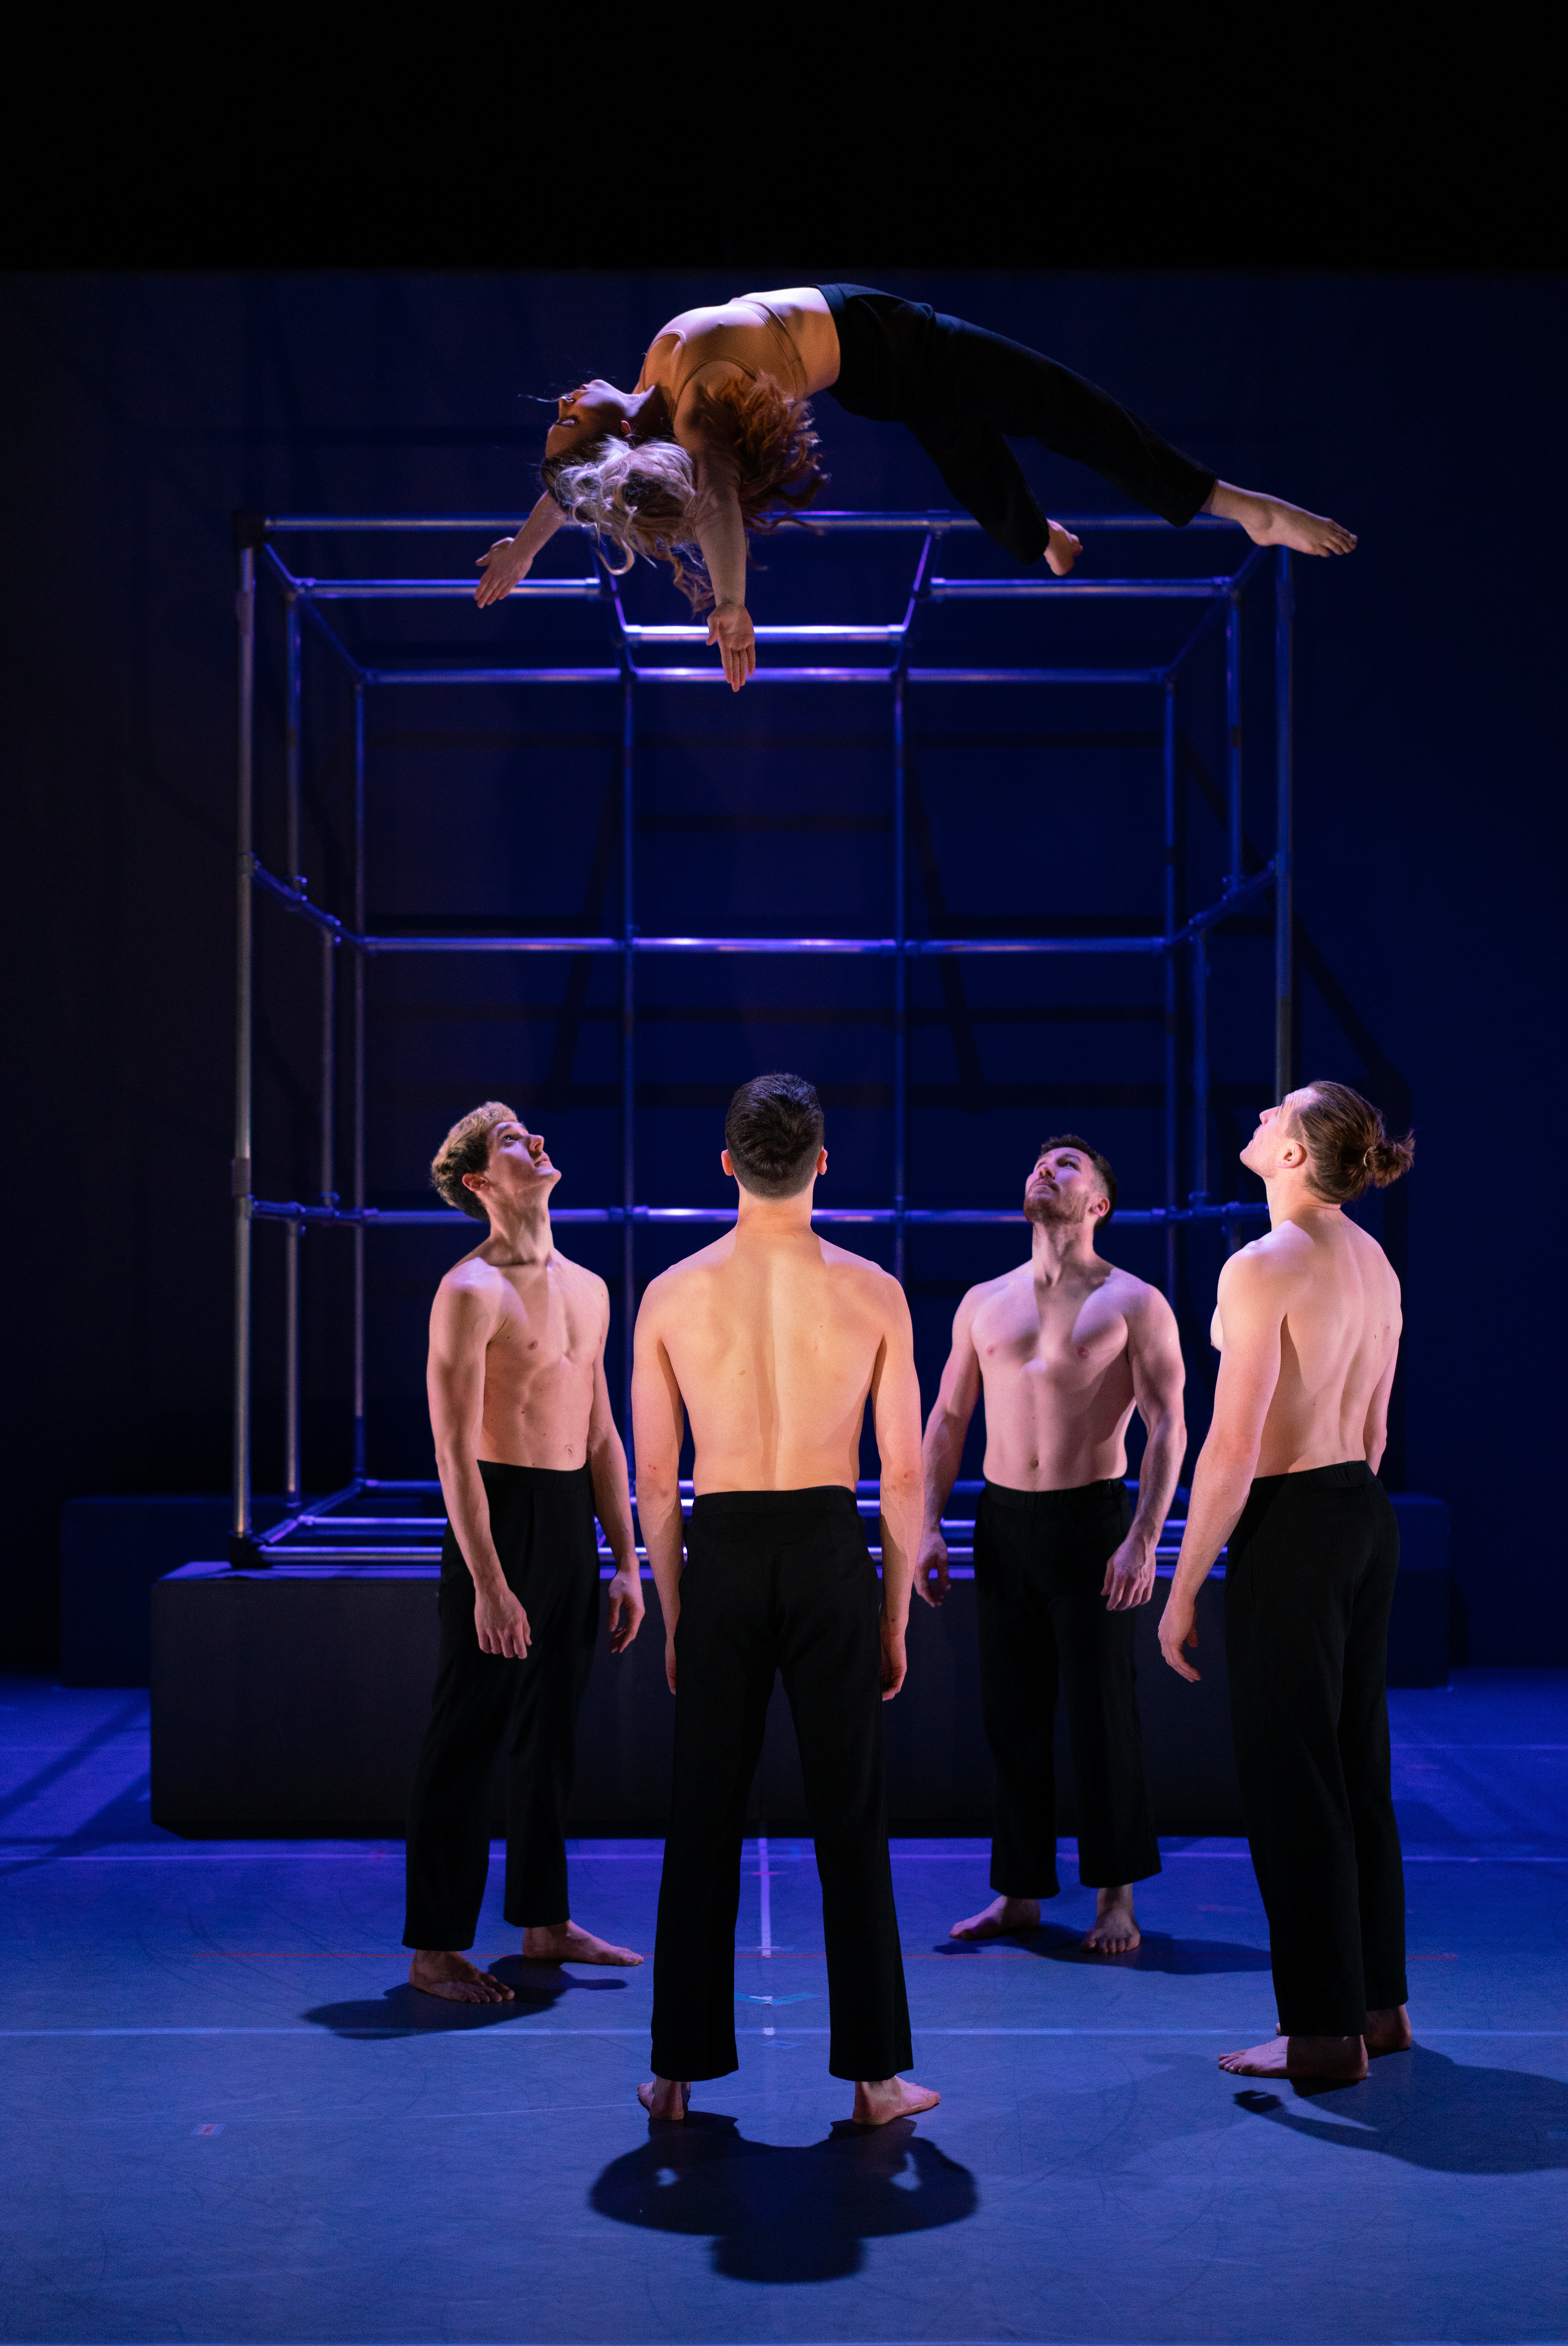 Additional gallery picture 12, Nobody by Motionhouse, image credit Dan Tucker